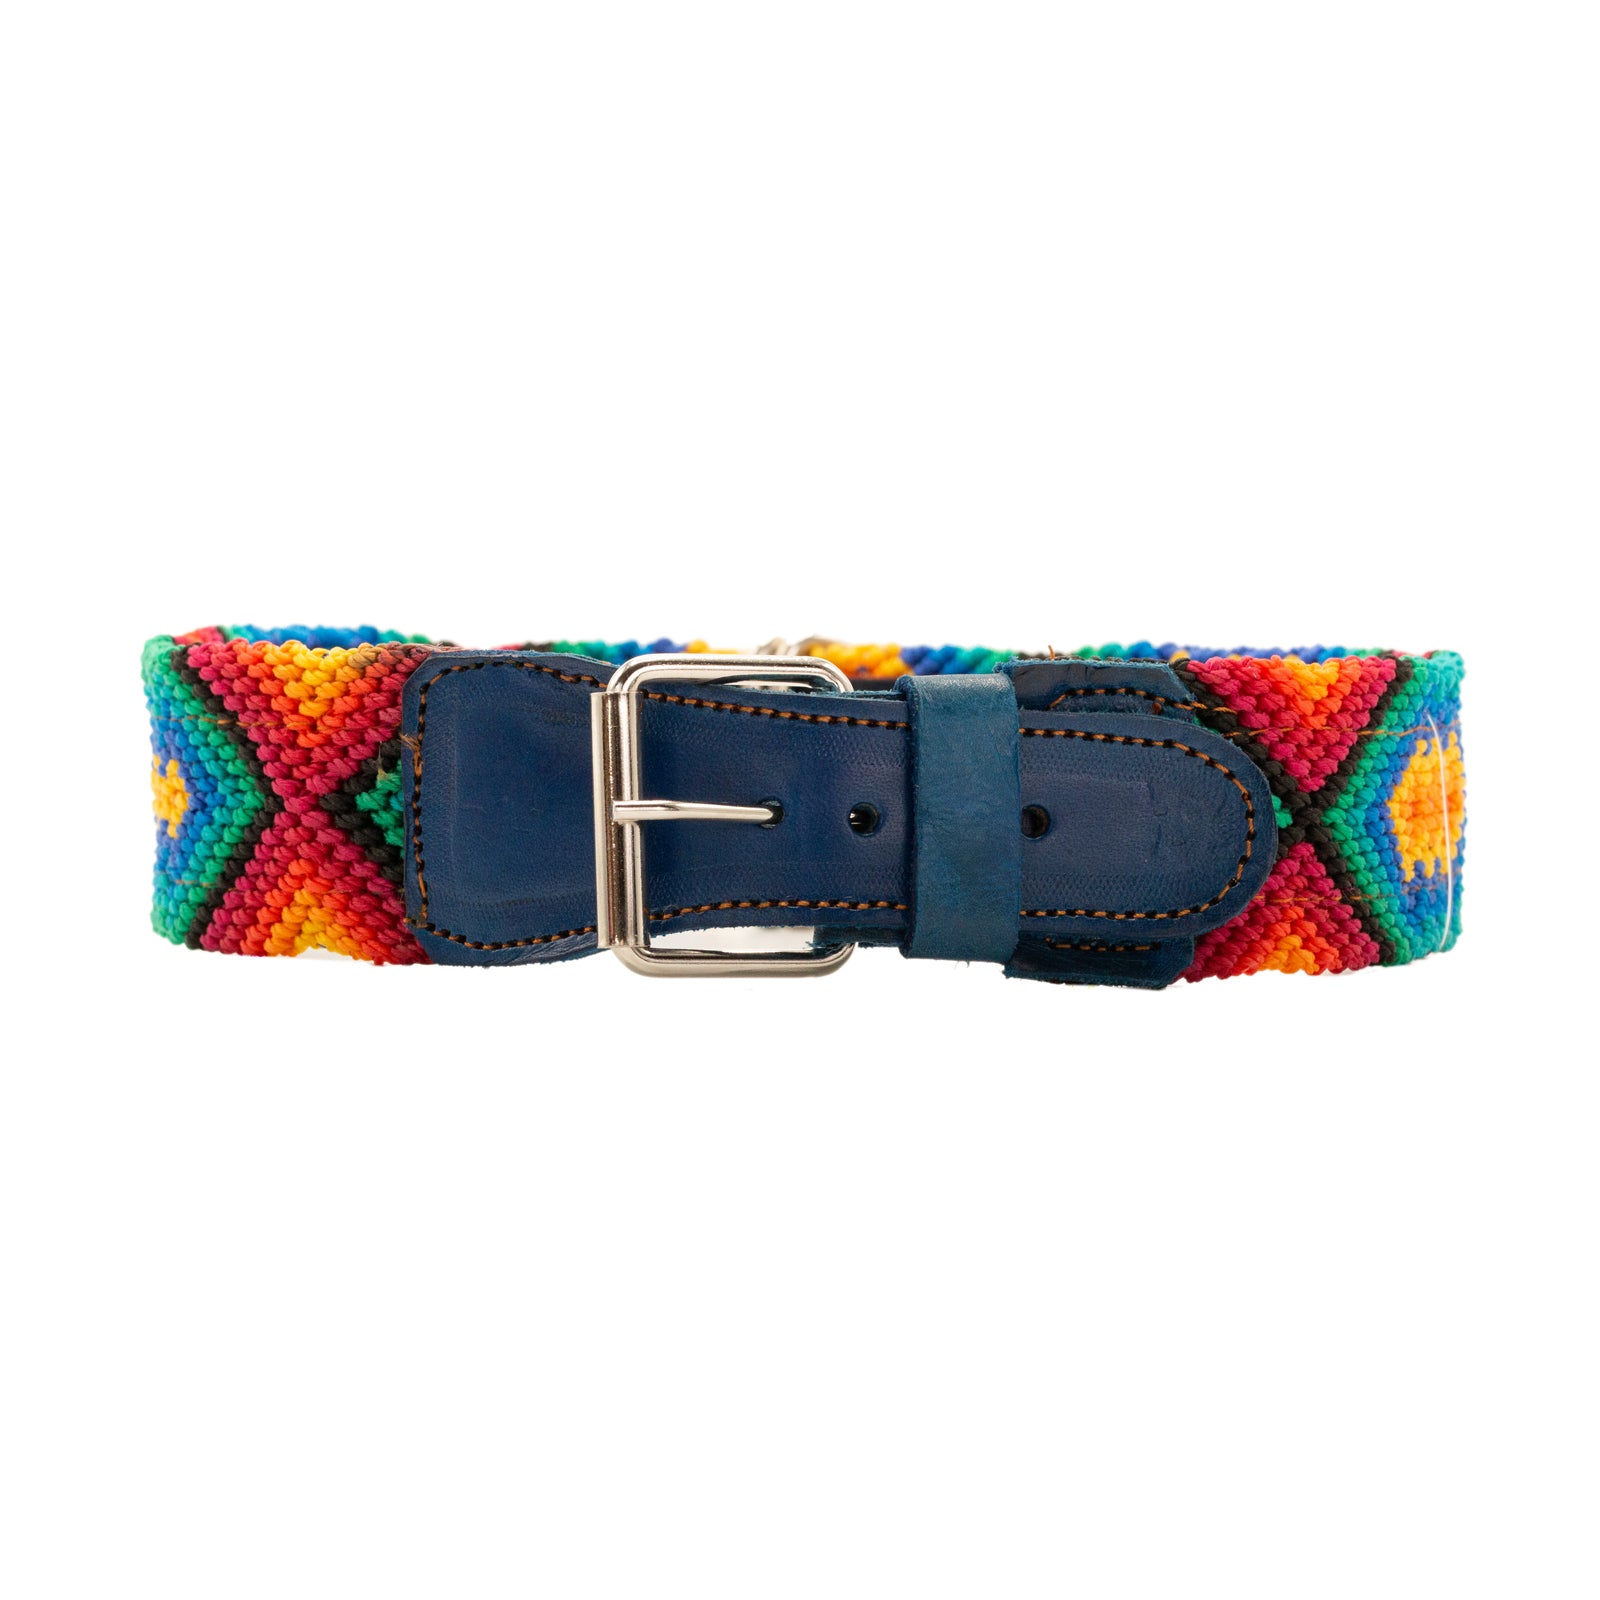 Artisanal dog collar featuring intricate handcrafted details